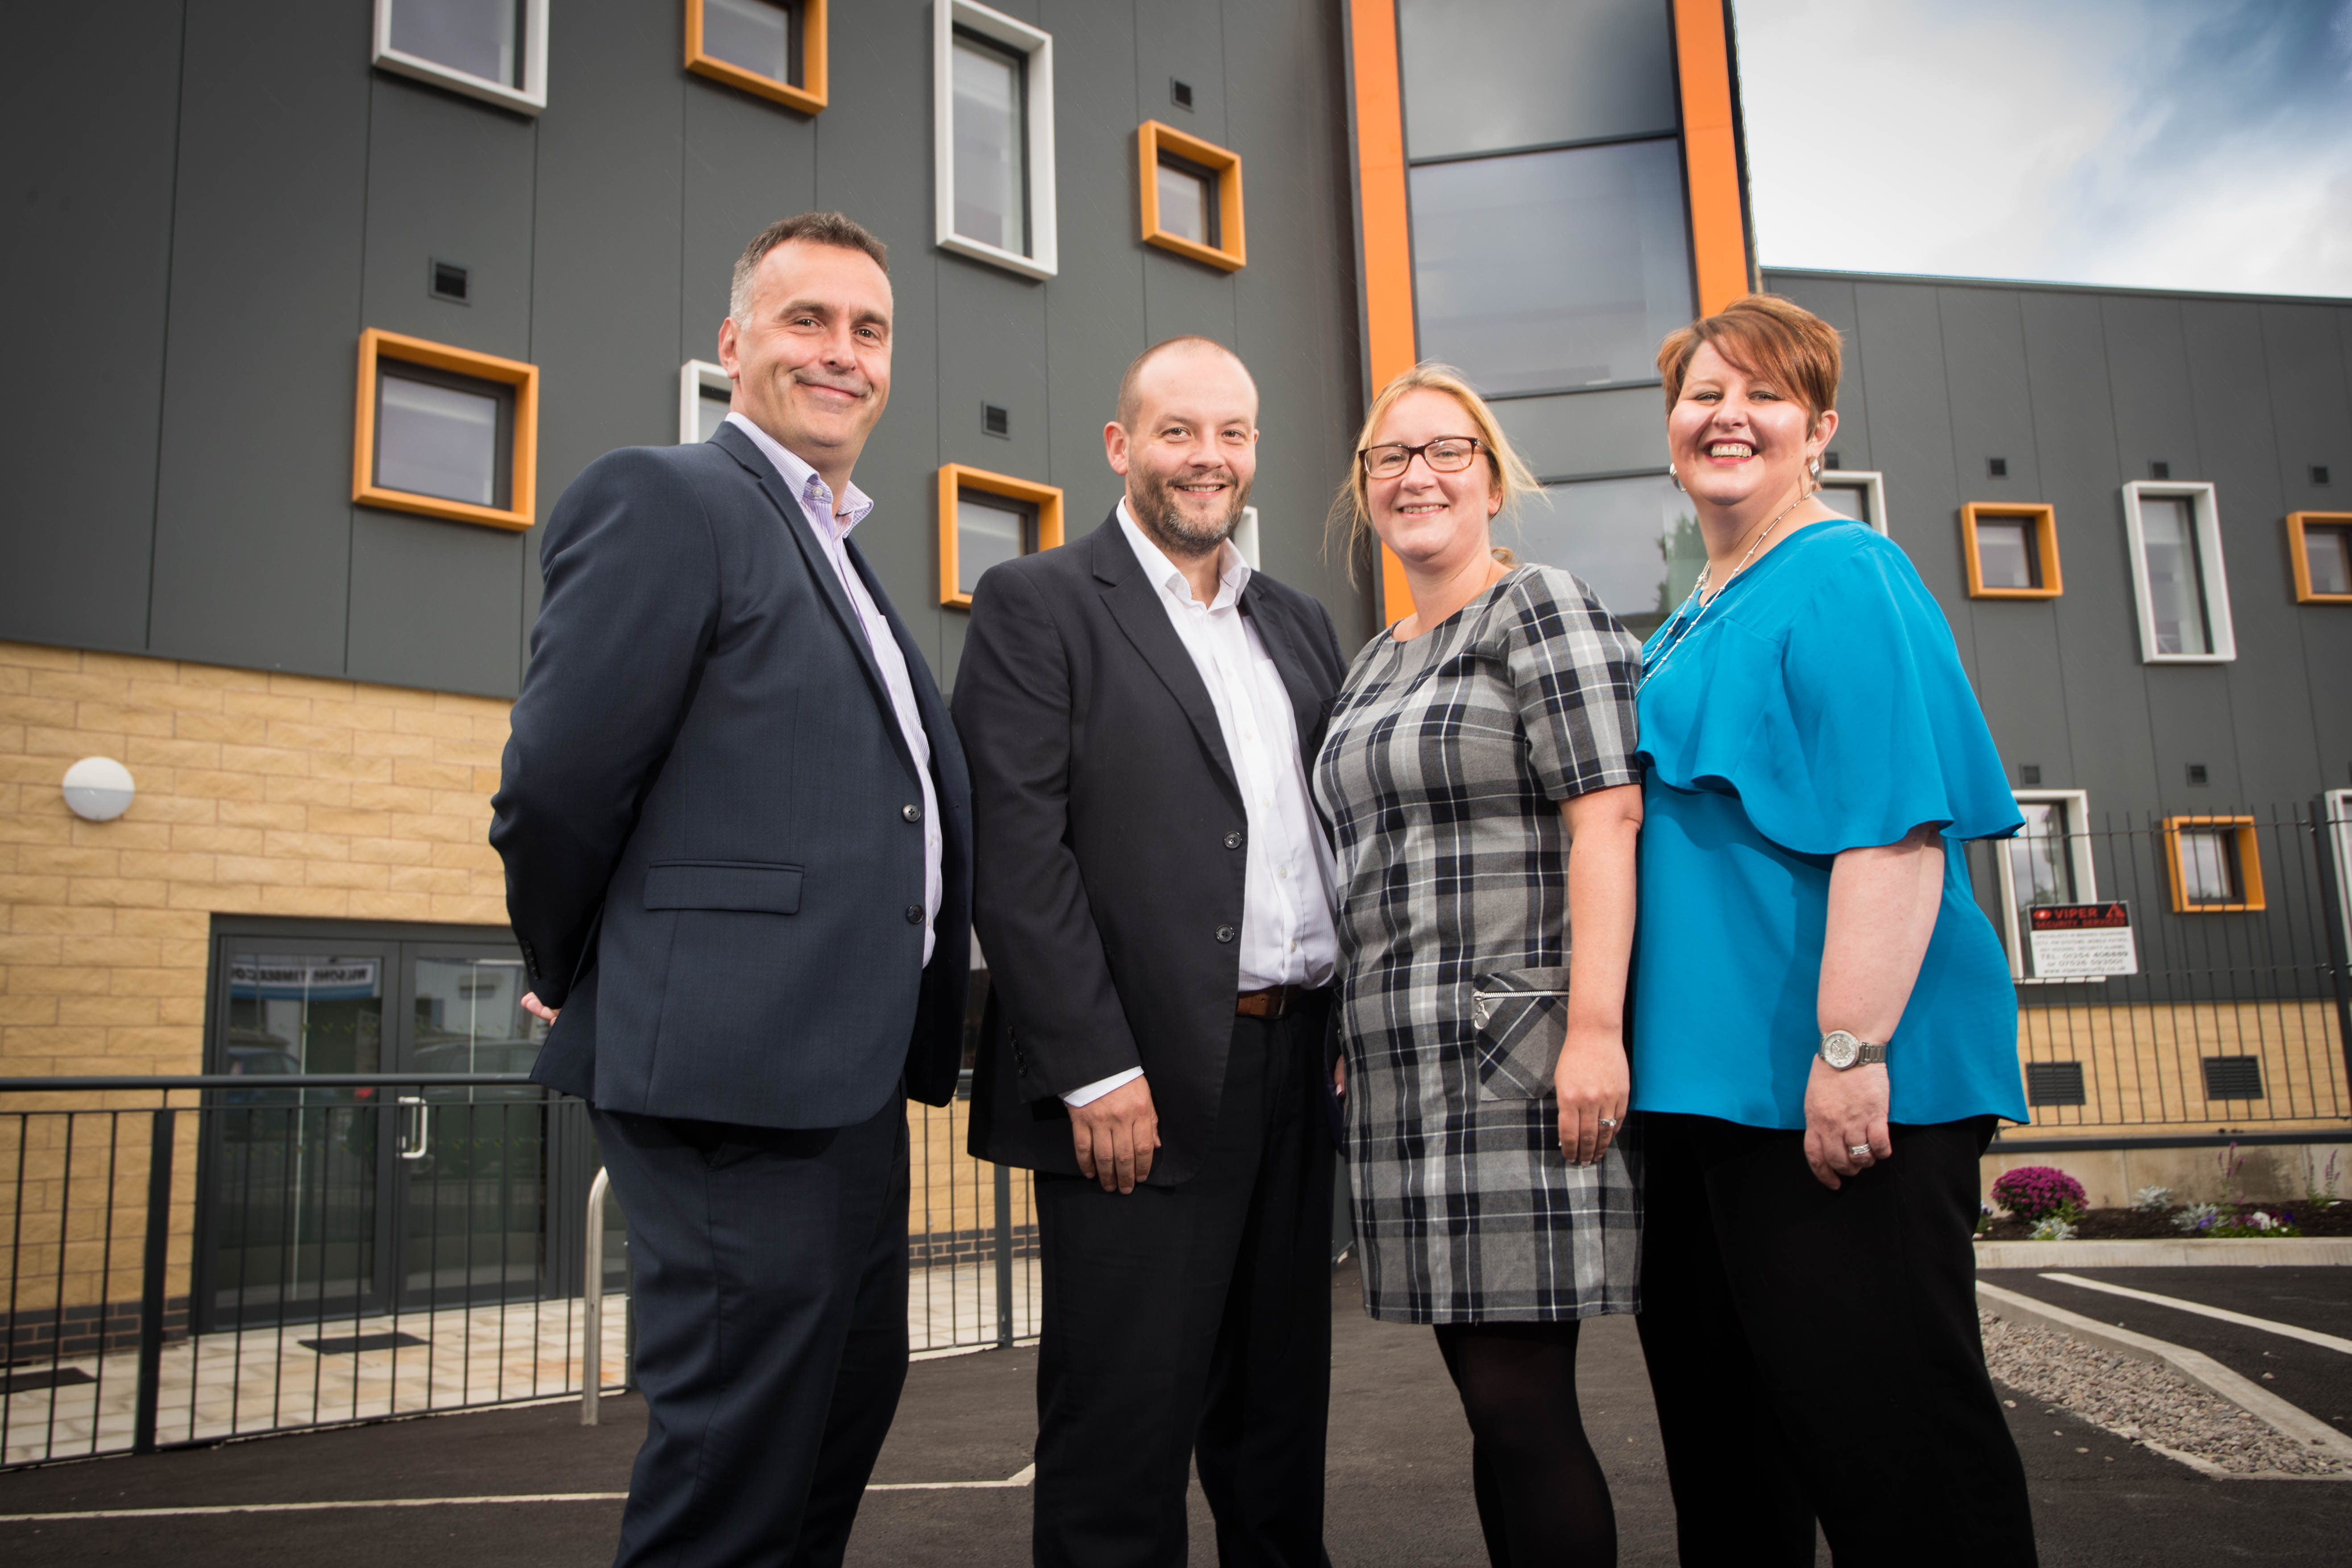 The Calico Group opens £3.5m flagship wellbeing centre for homeless and vulnerable people